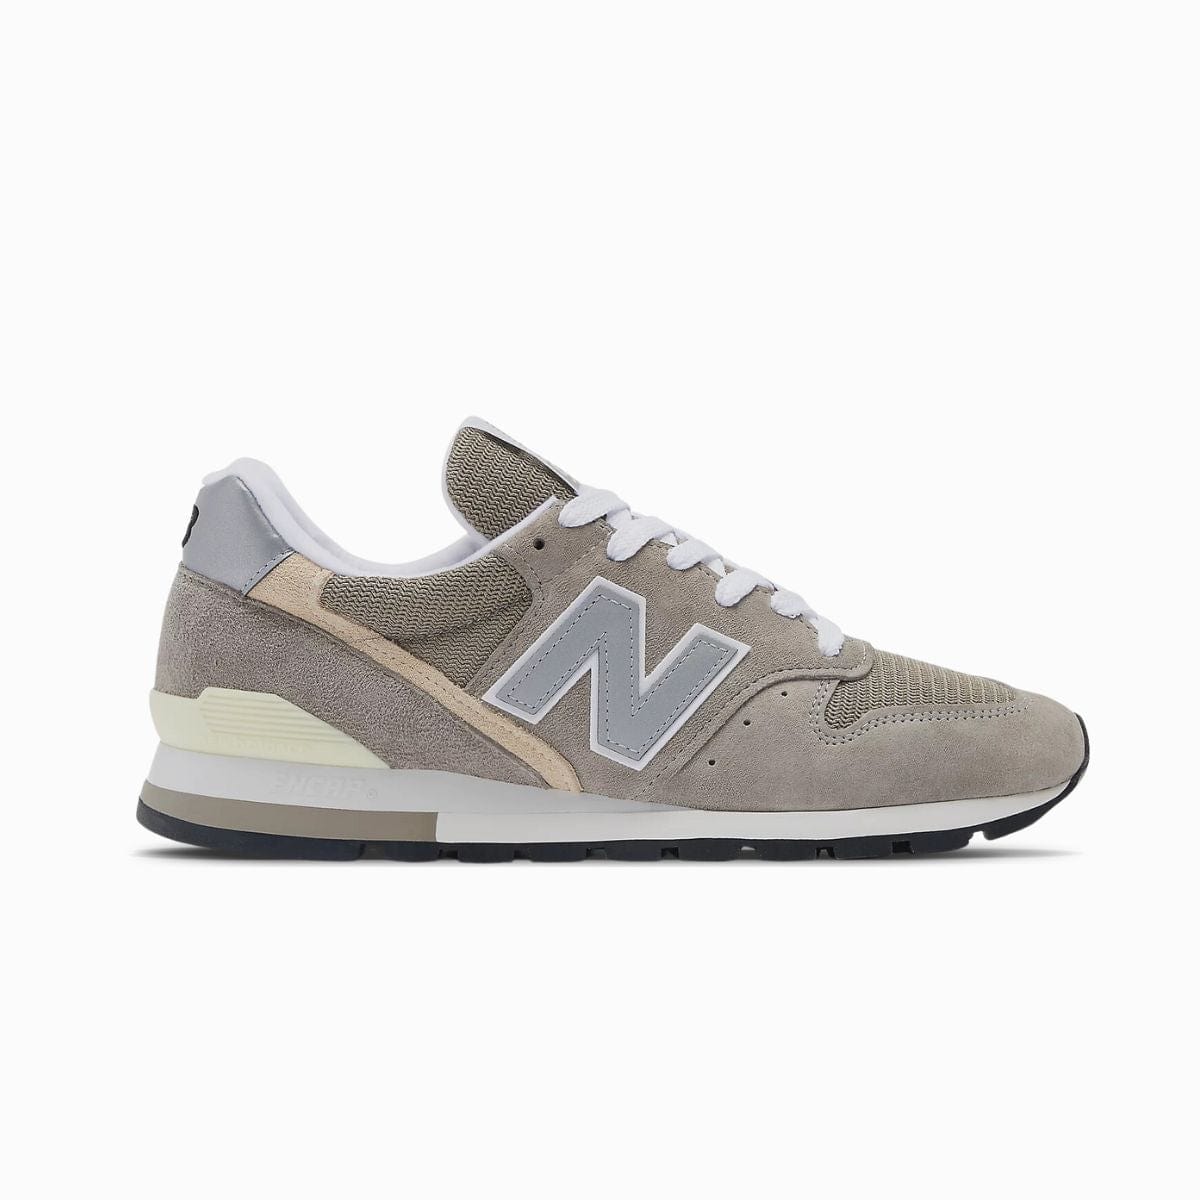 New Balance 996 Replacement Shoelaces